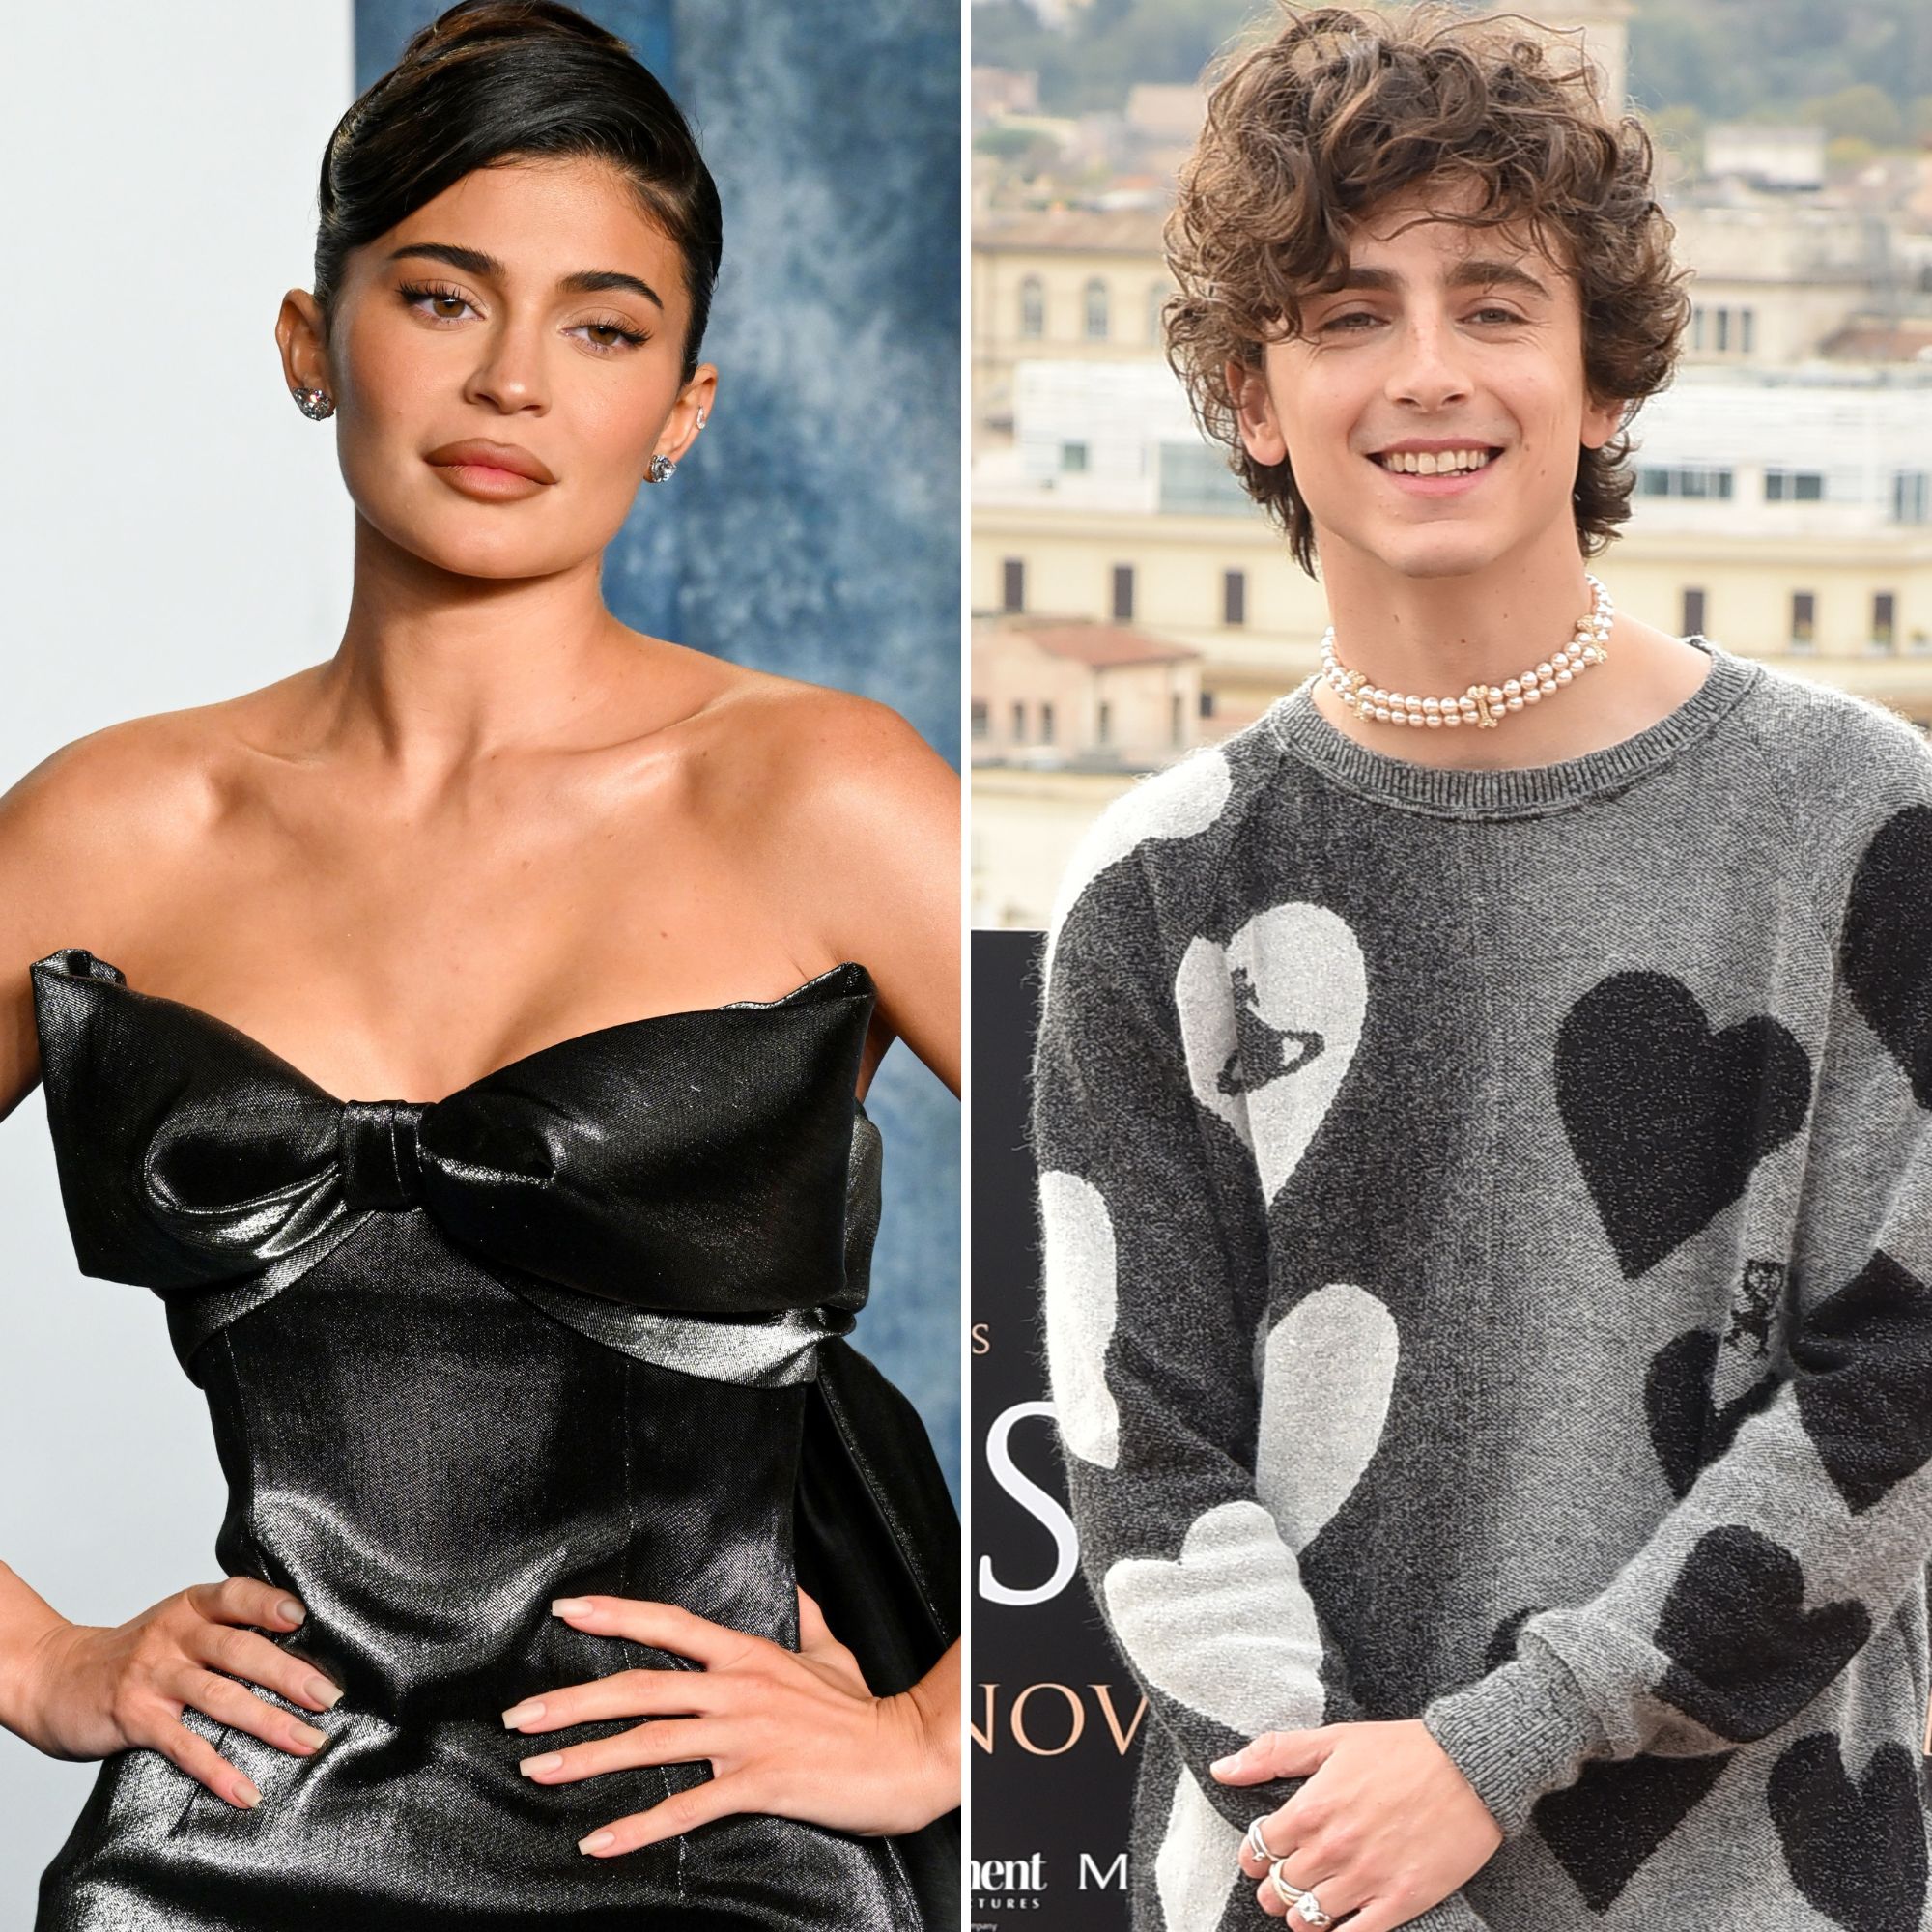 Kylie Jenner, Timothee Chalamet's Relationship Is 'Not Serious